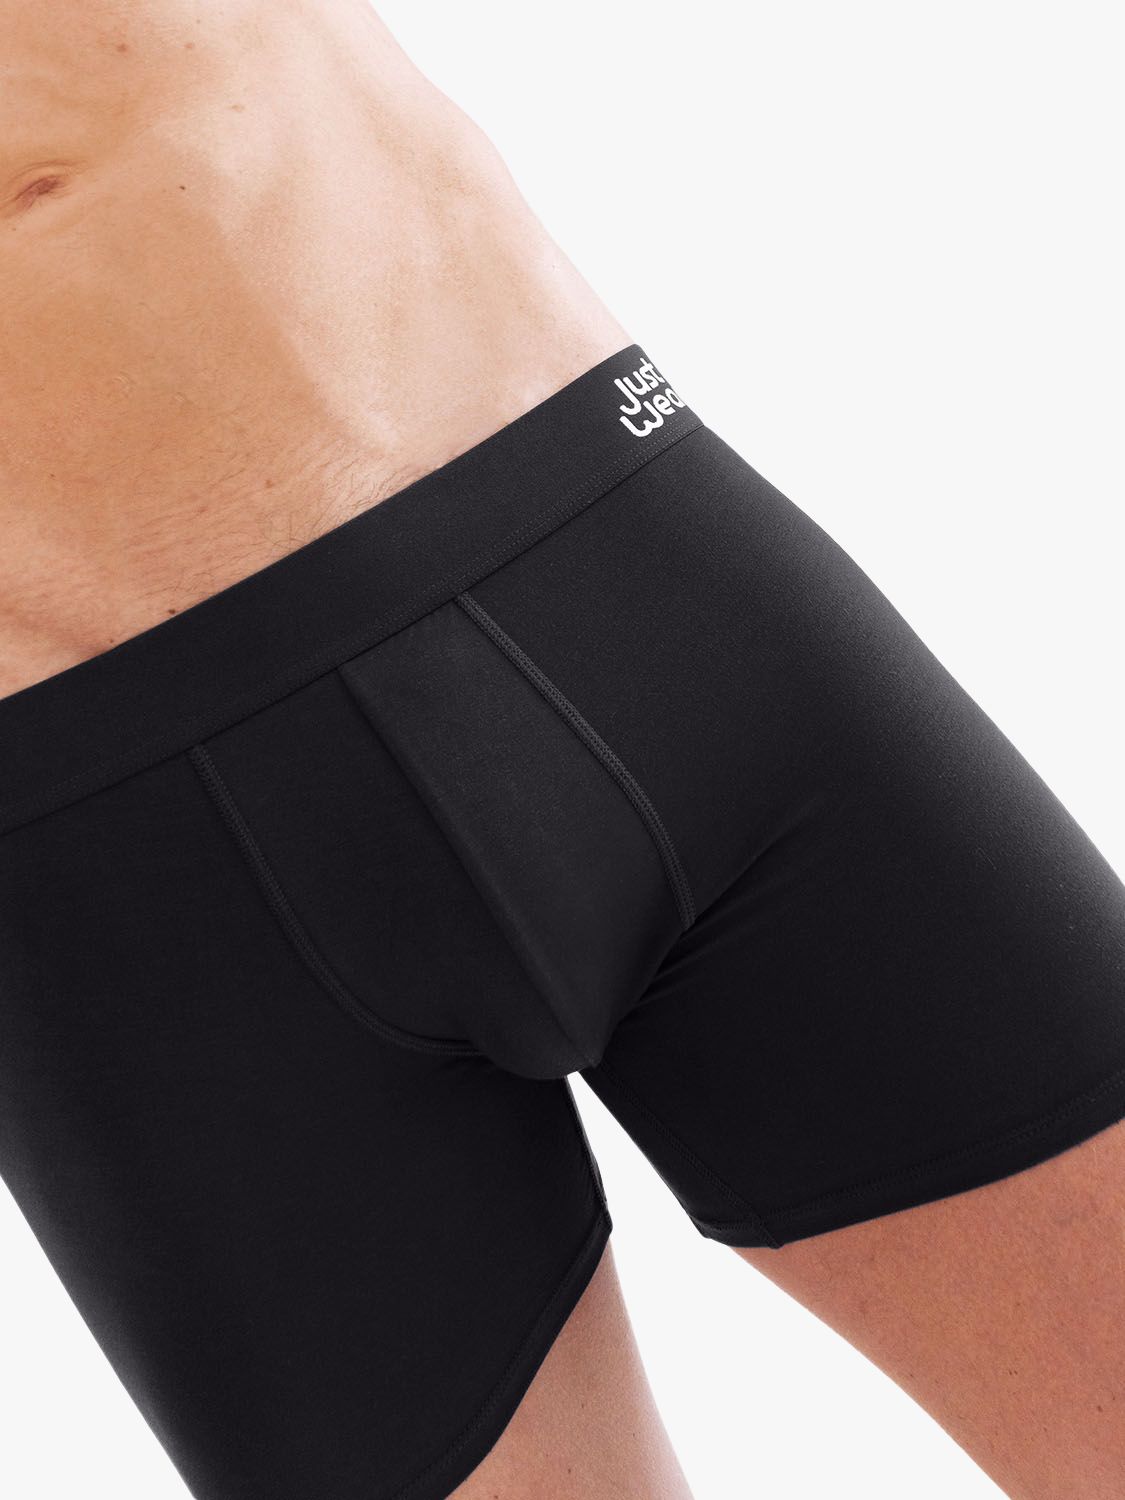 JustWears Active Boxers, Pack of 3, All Black at John Lewis & Partners